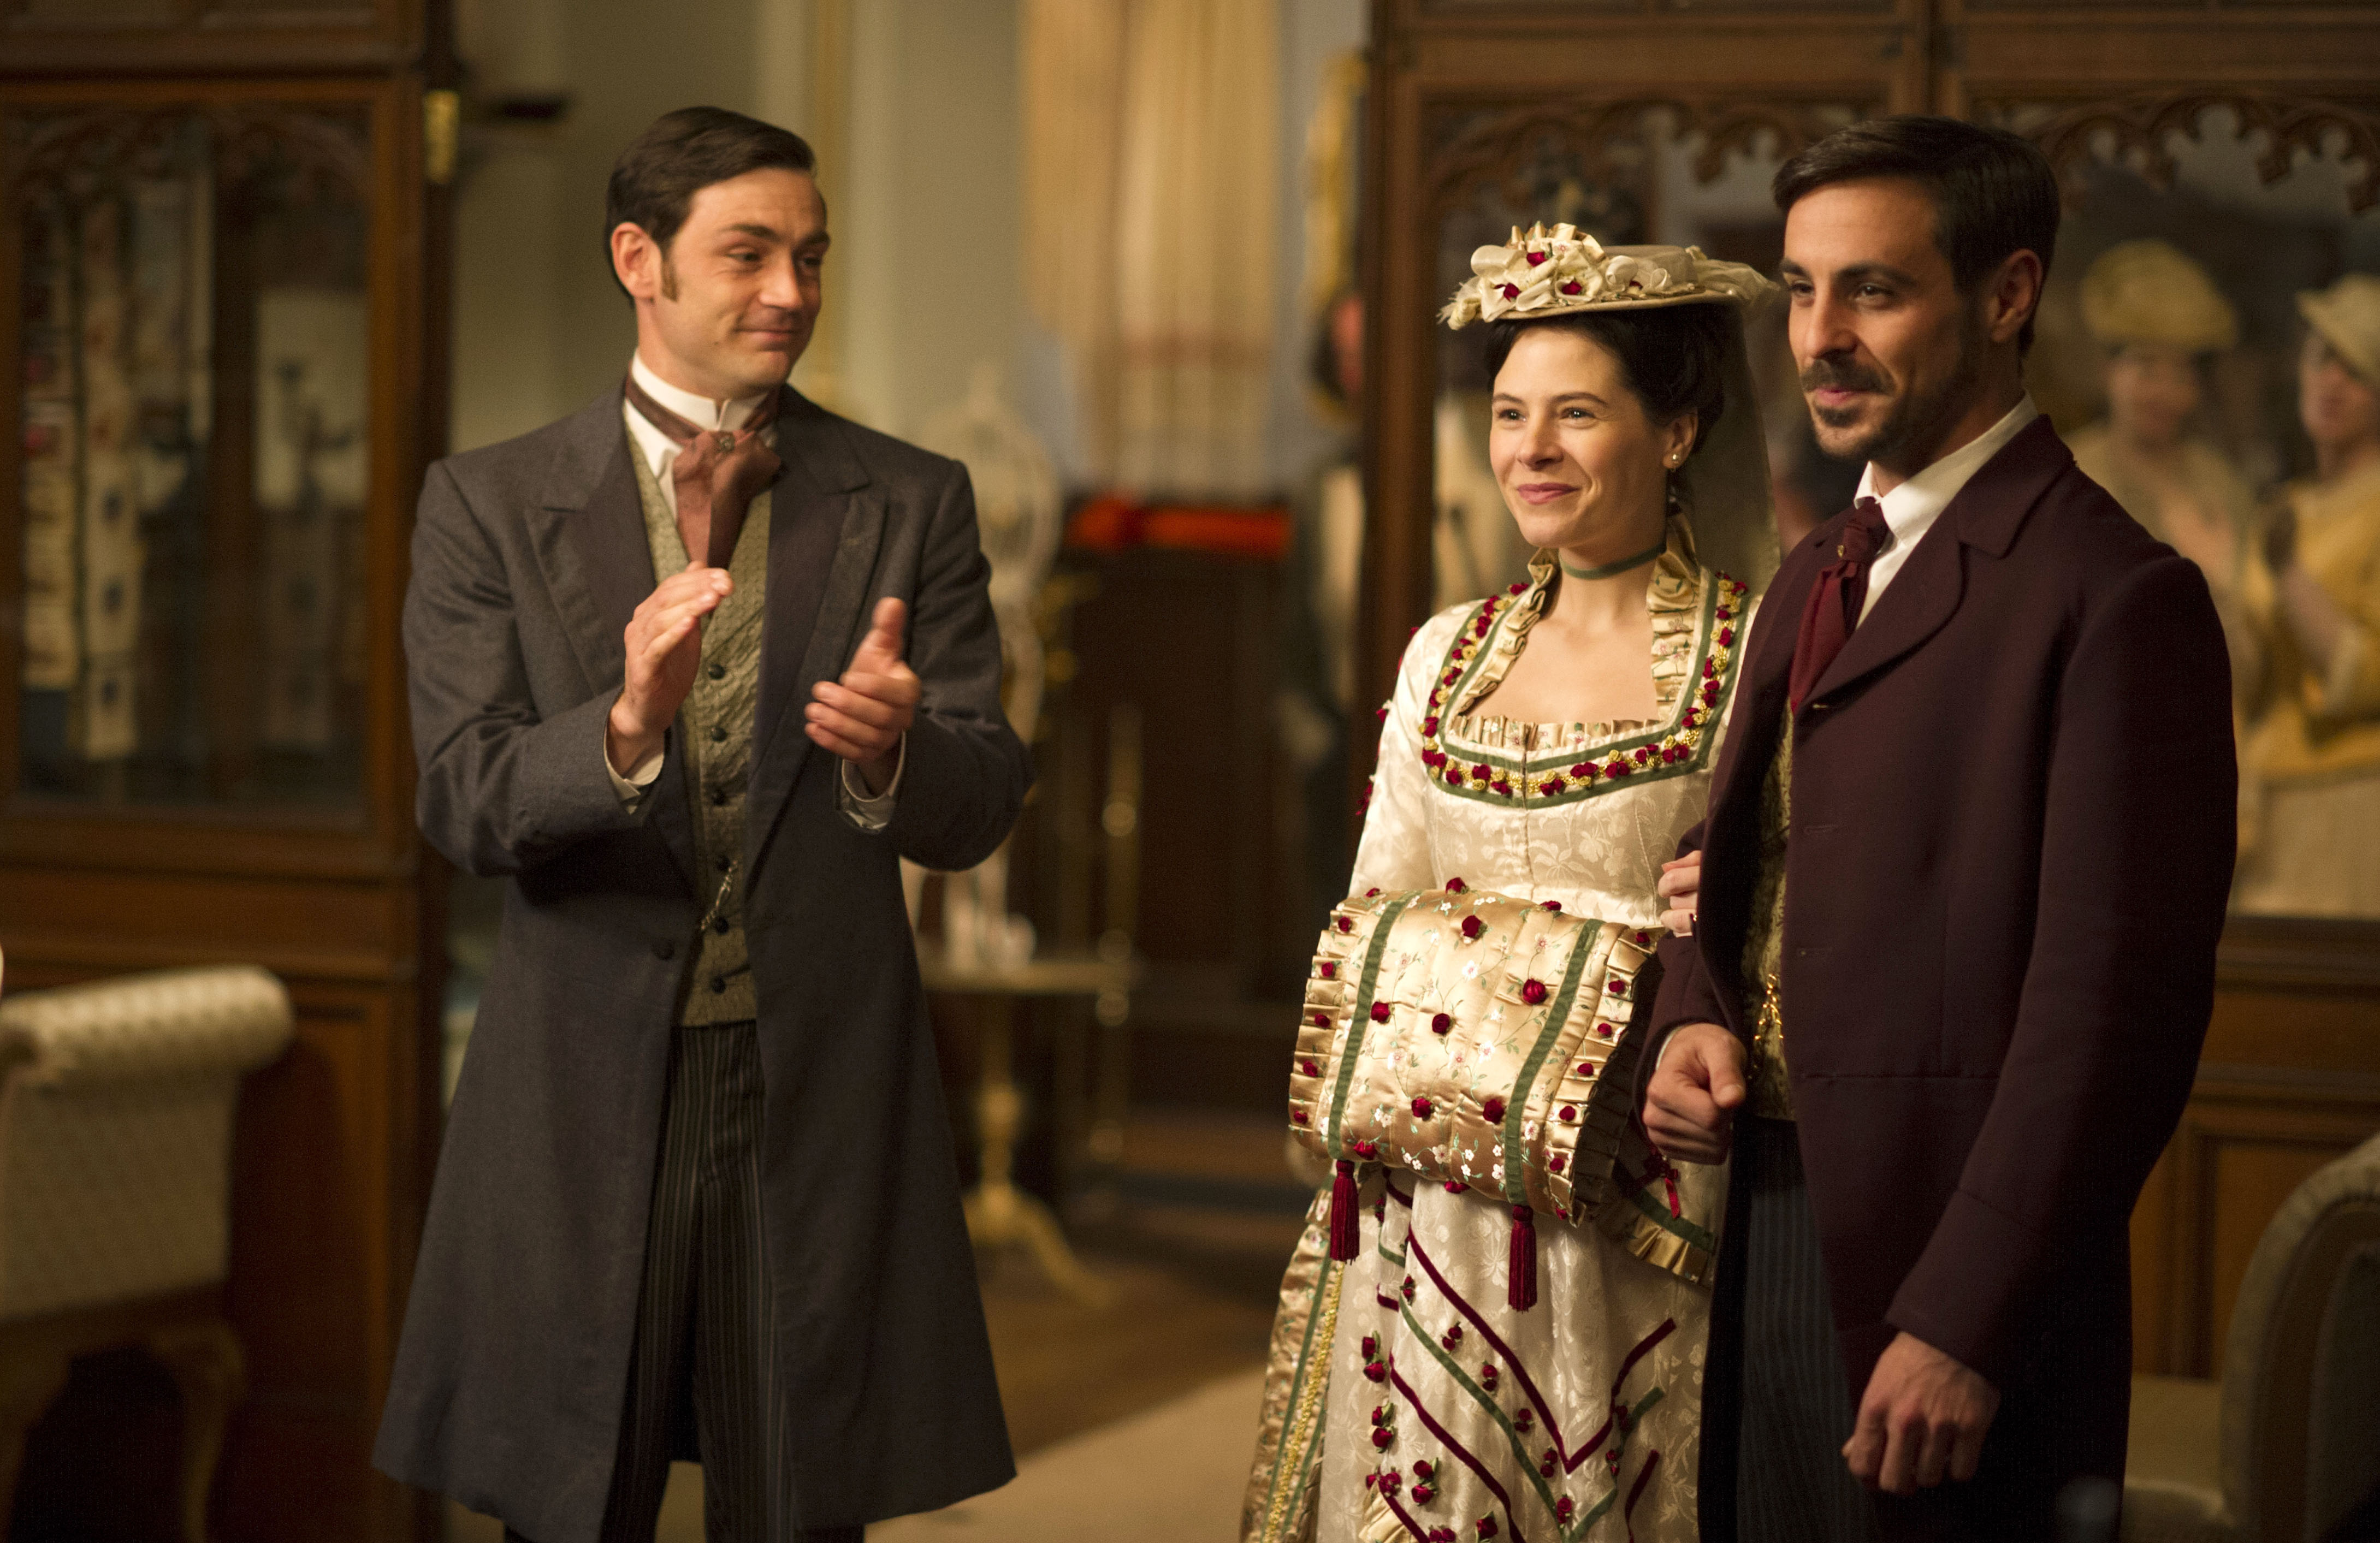 Dudley's psyched about Moray and Katherine's big news. (Photo: Courtesy of (C) Des Willie/BBC 2012 for MASTERPIECE)